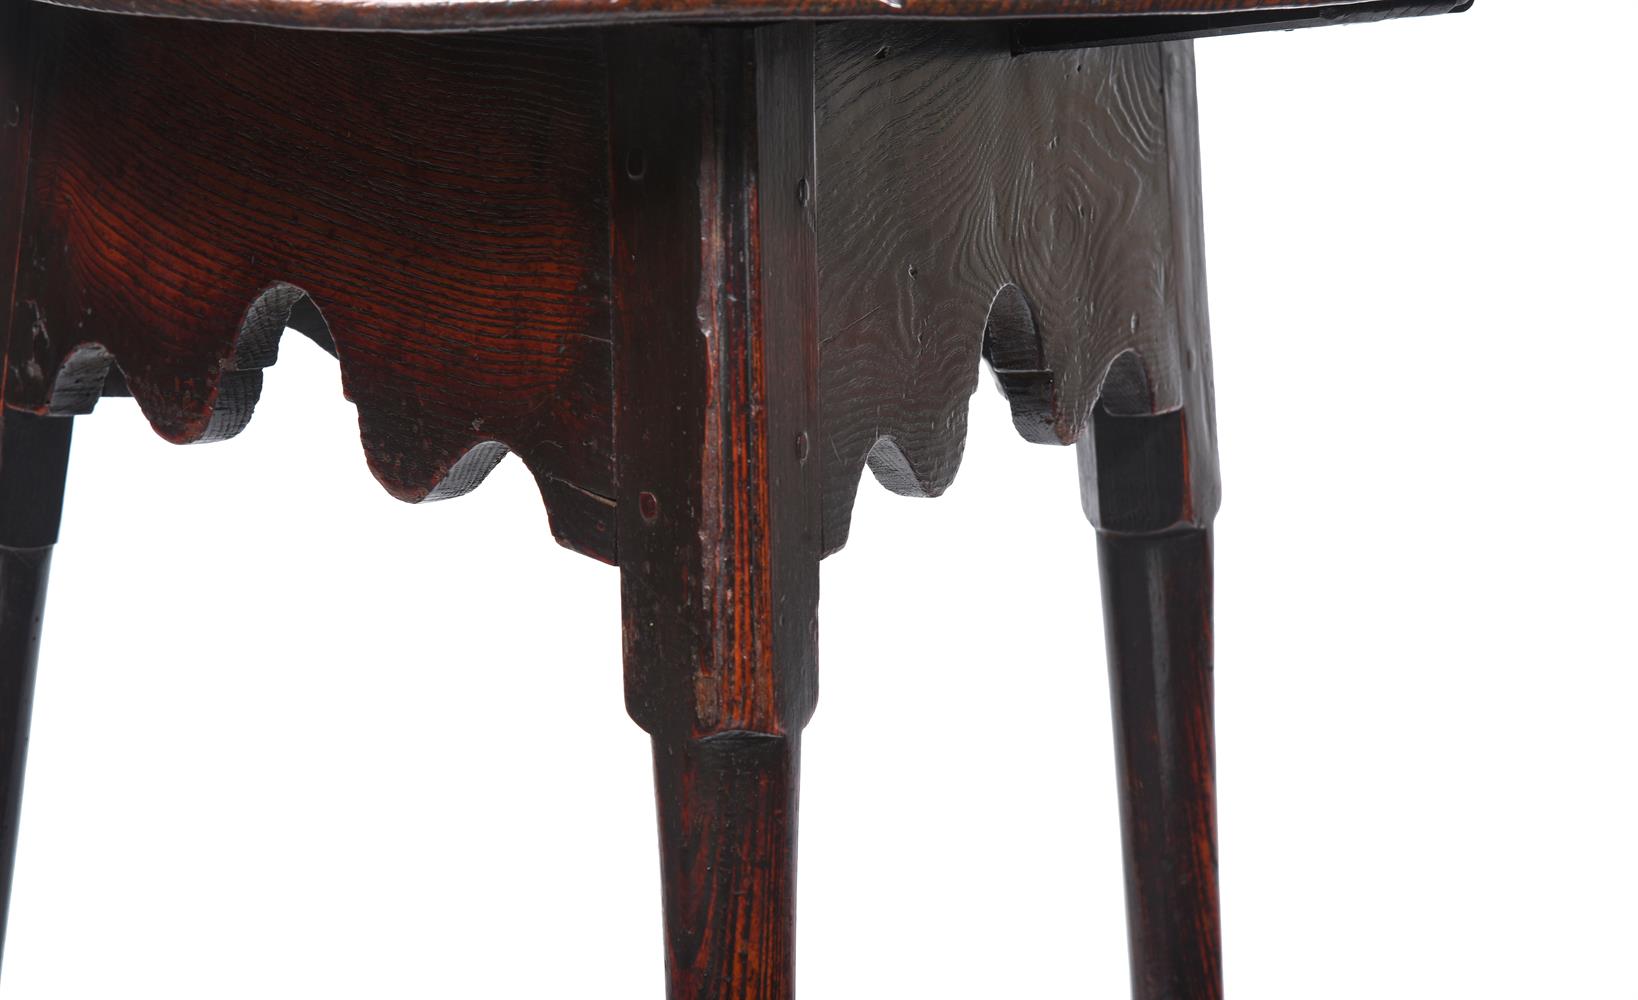 A GEORGE II OAK, ELM AND MAHOGANY 'CRICKET' TABLE, MID 18TH CENTURY - Image 3 of 3